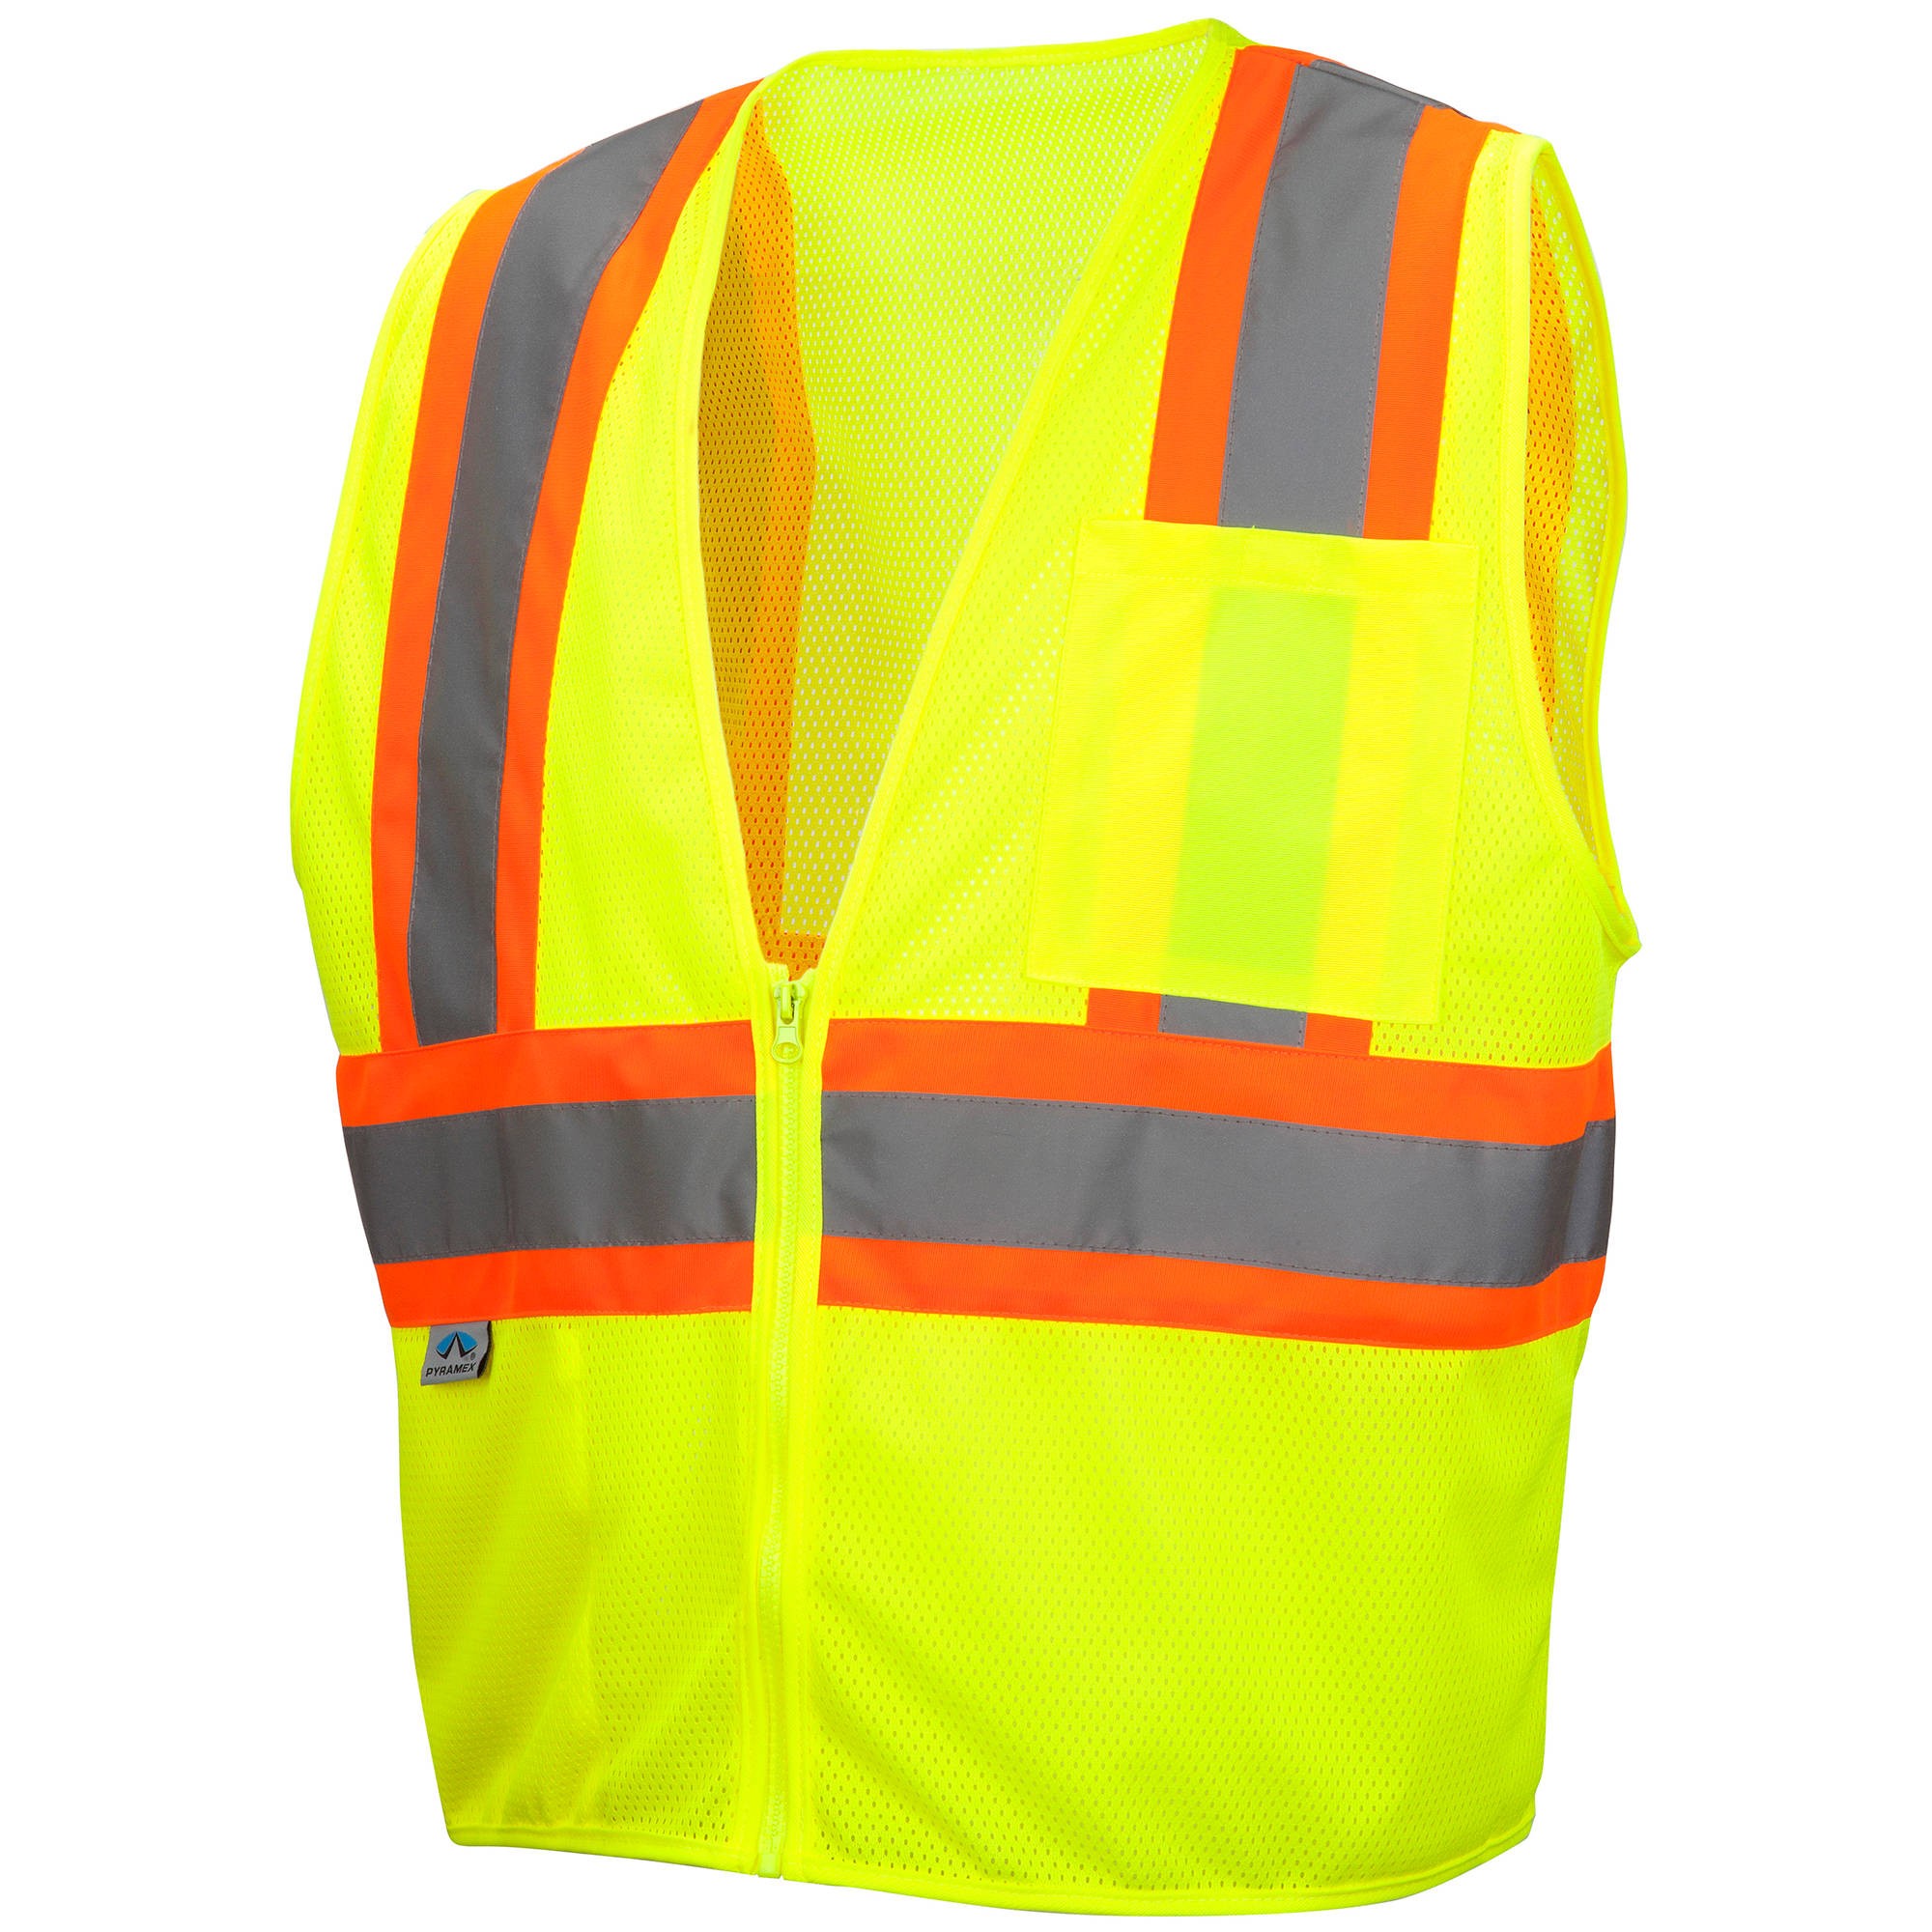 Pyramex RVZ2210 Type R Class 2 Mesh Two-Tone Safety Vest - Yellow